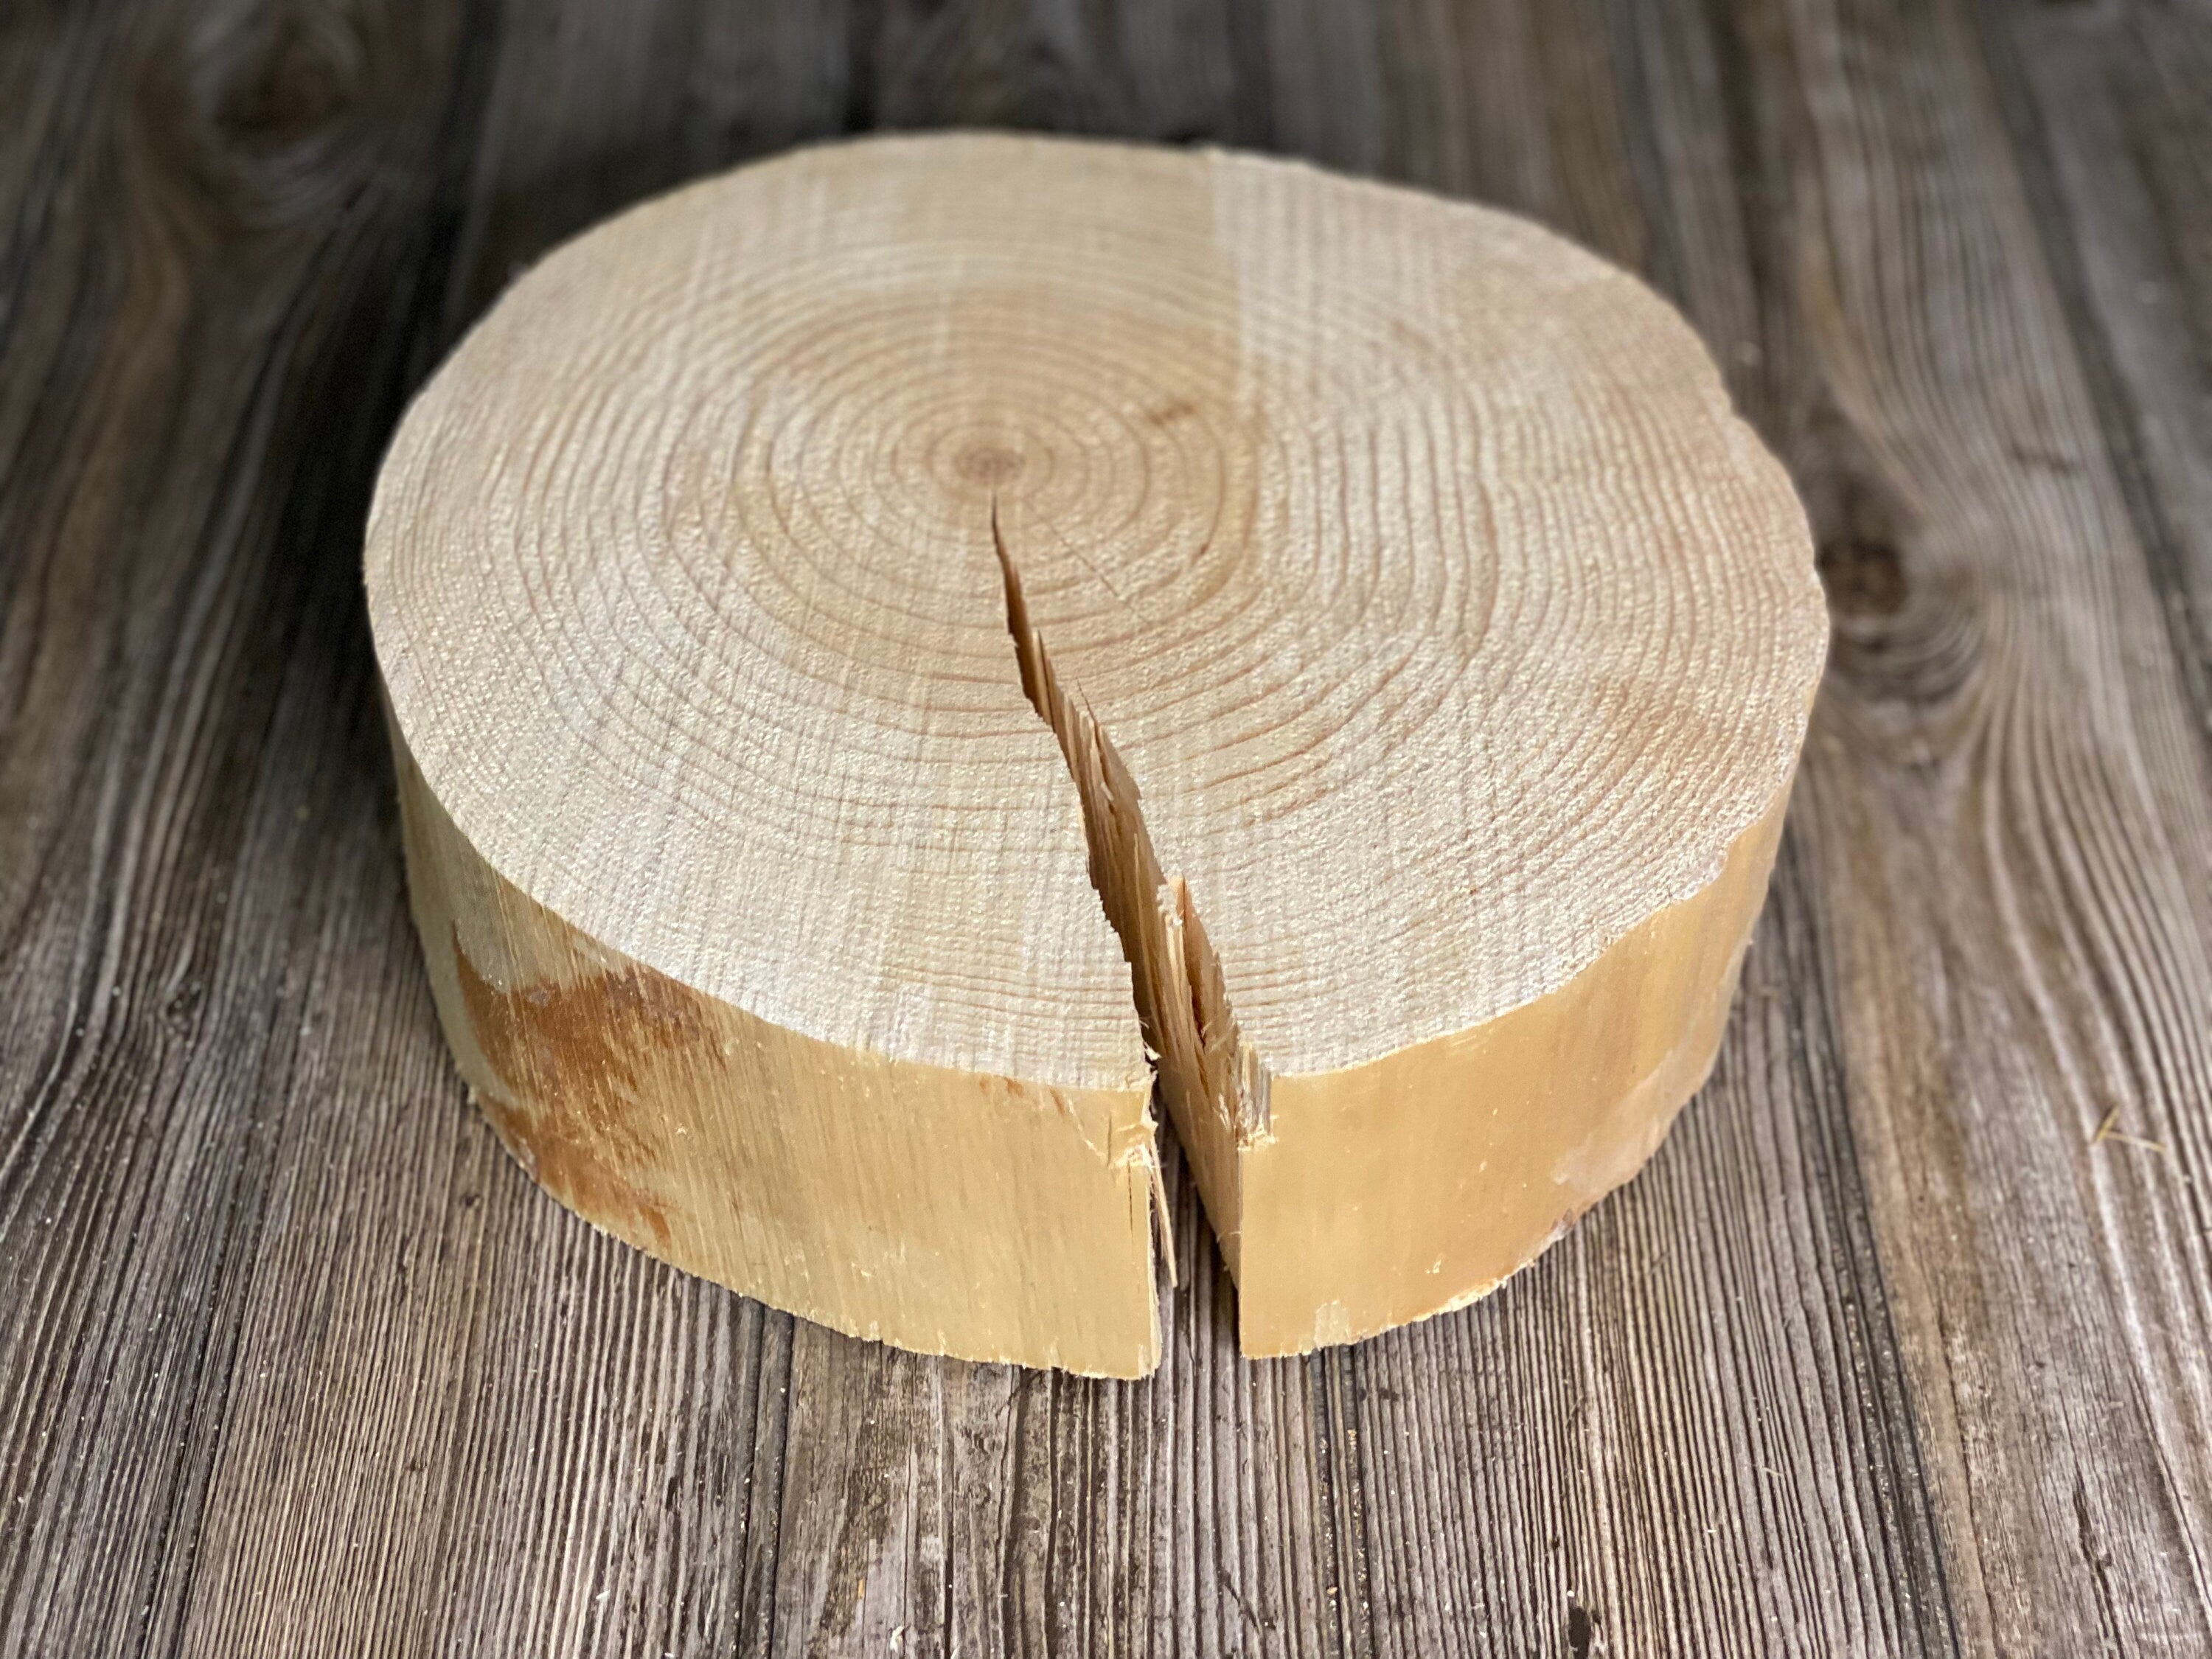 Pine Slice, Approximately 11 Inches Long by 11 Inches Wide and 3 Inches Tall